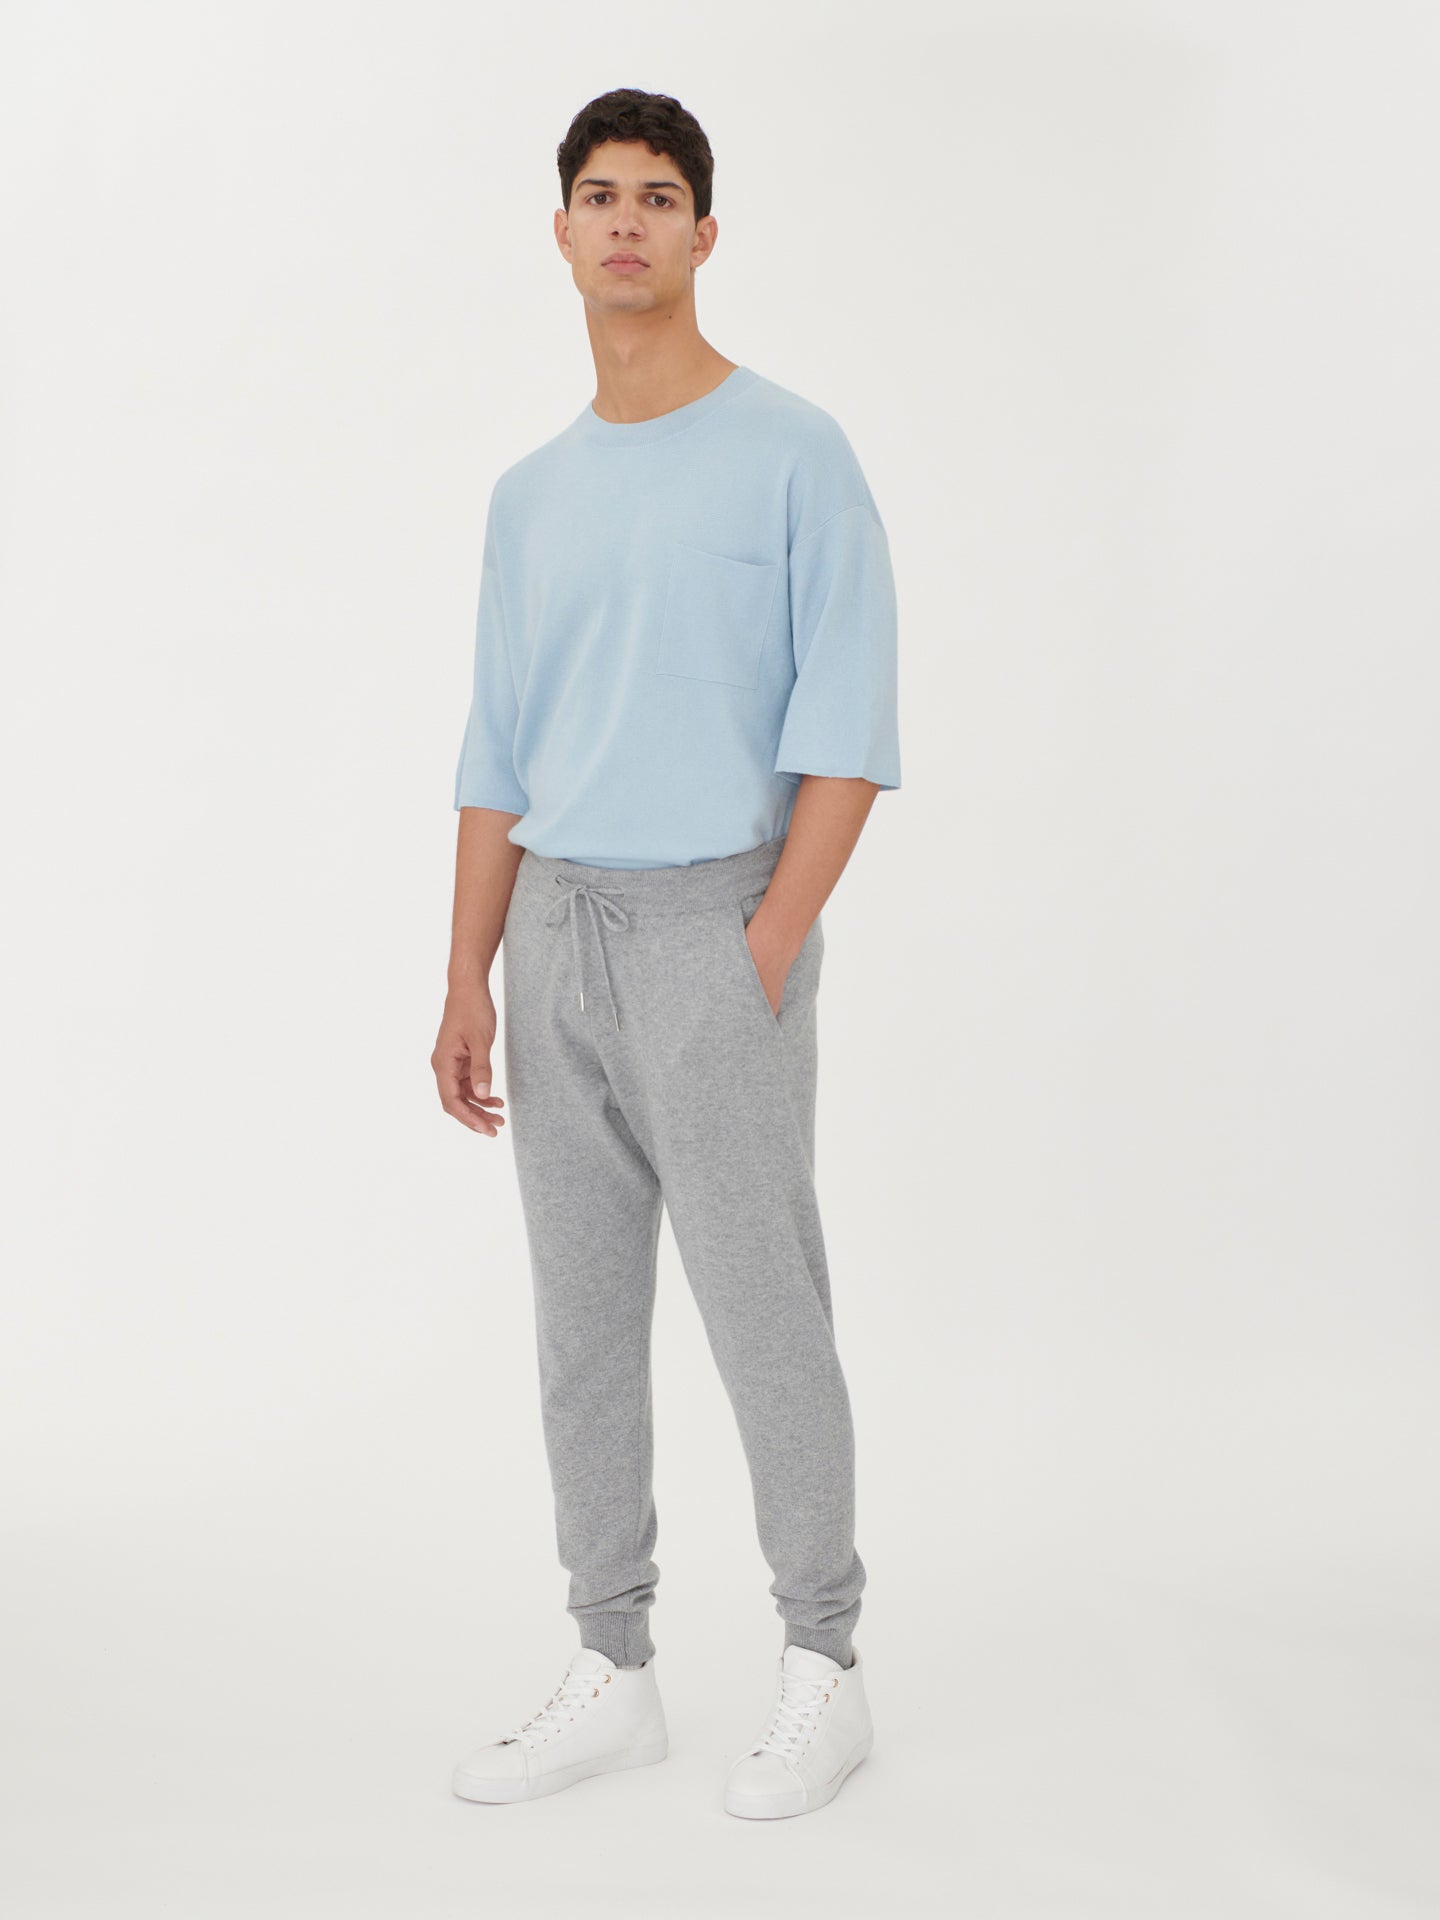 GHIAIA CASHMERE Tapered Cashmere Sweatpants for Men